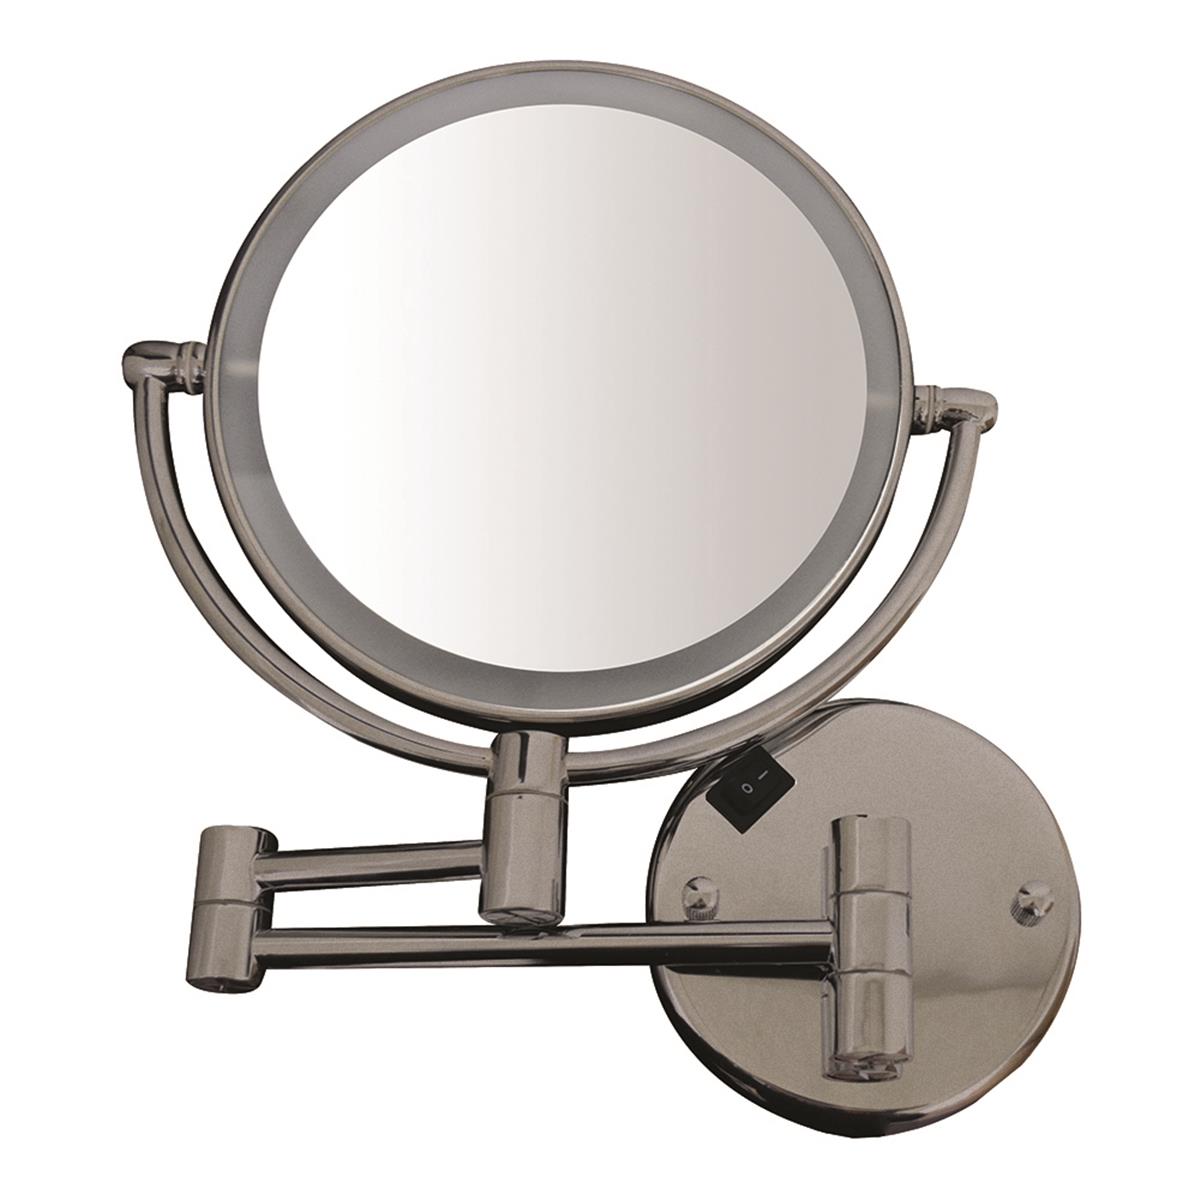 Whmr912-bn Round Wall Mount Dual Led 7x Magnified Mirror - Brushed Nickel